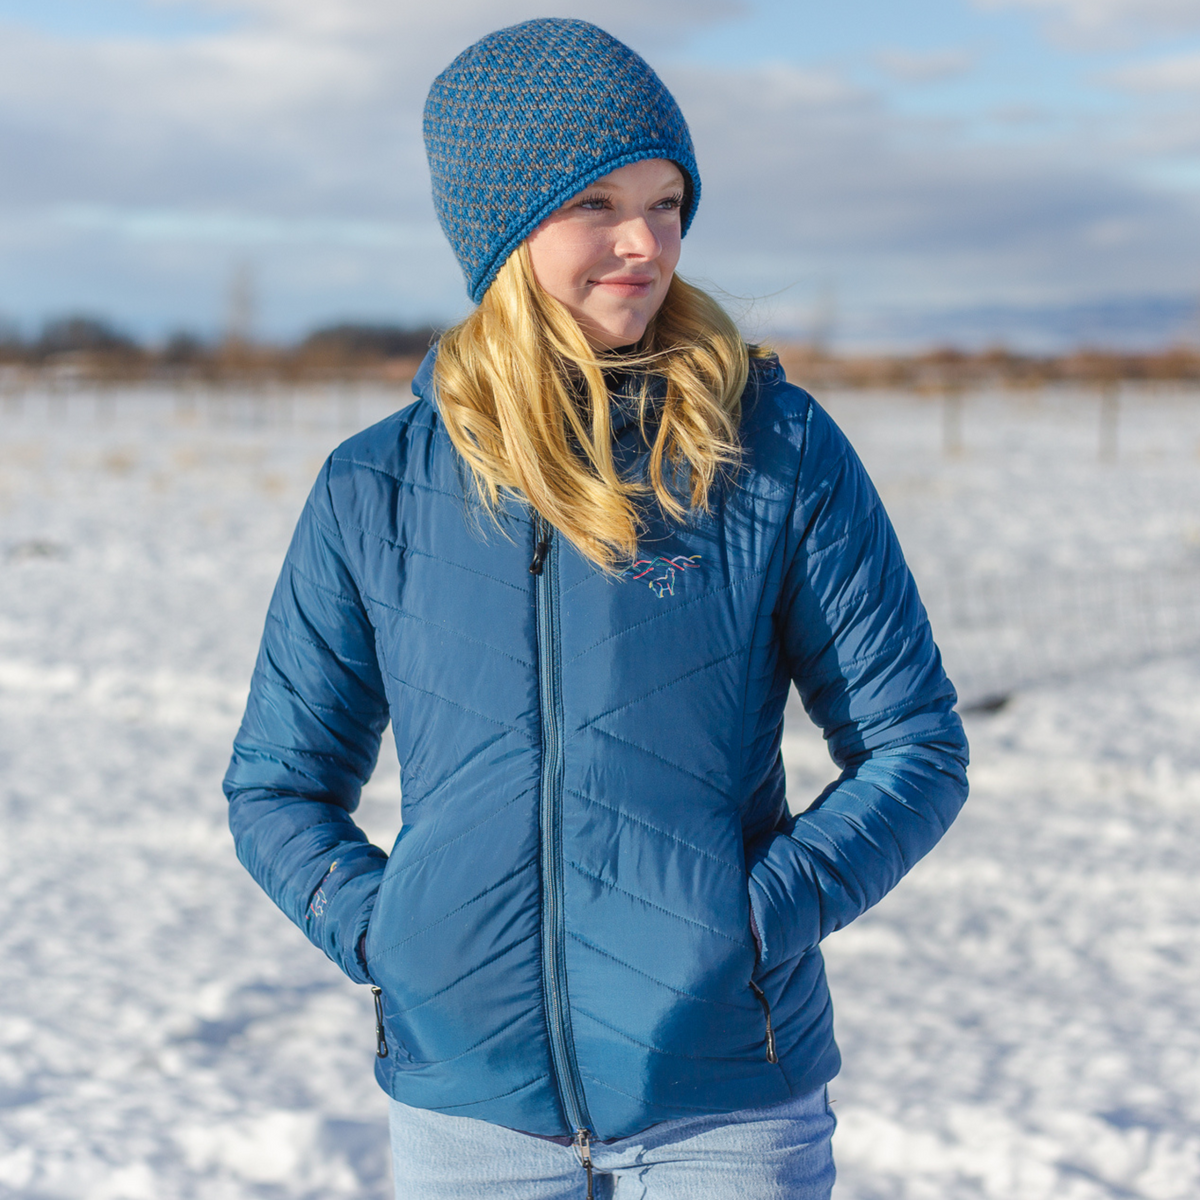 A blonde woman standing in a sunny winter scene. She is wearing a blue and gray Alpacas of Montana winter fleece beanie and a cobalt blue Alpacas of Montana men&#39;s base layer top, and a Alpacas of Montana warm top layer insulated cozy comfortable thermal winter outerwear heavyweight alpaca wool lined women&#39;s mismi coat jacket parka for skiing, snowboarding, ice fishing, hunting, camping, arctic, travel, outdoors